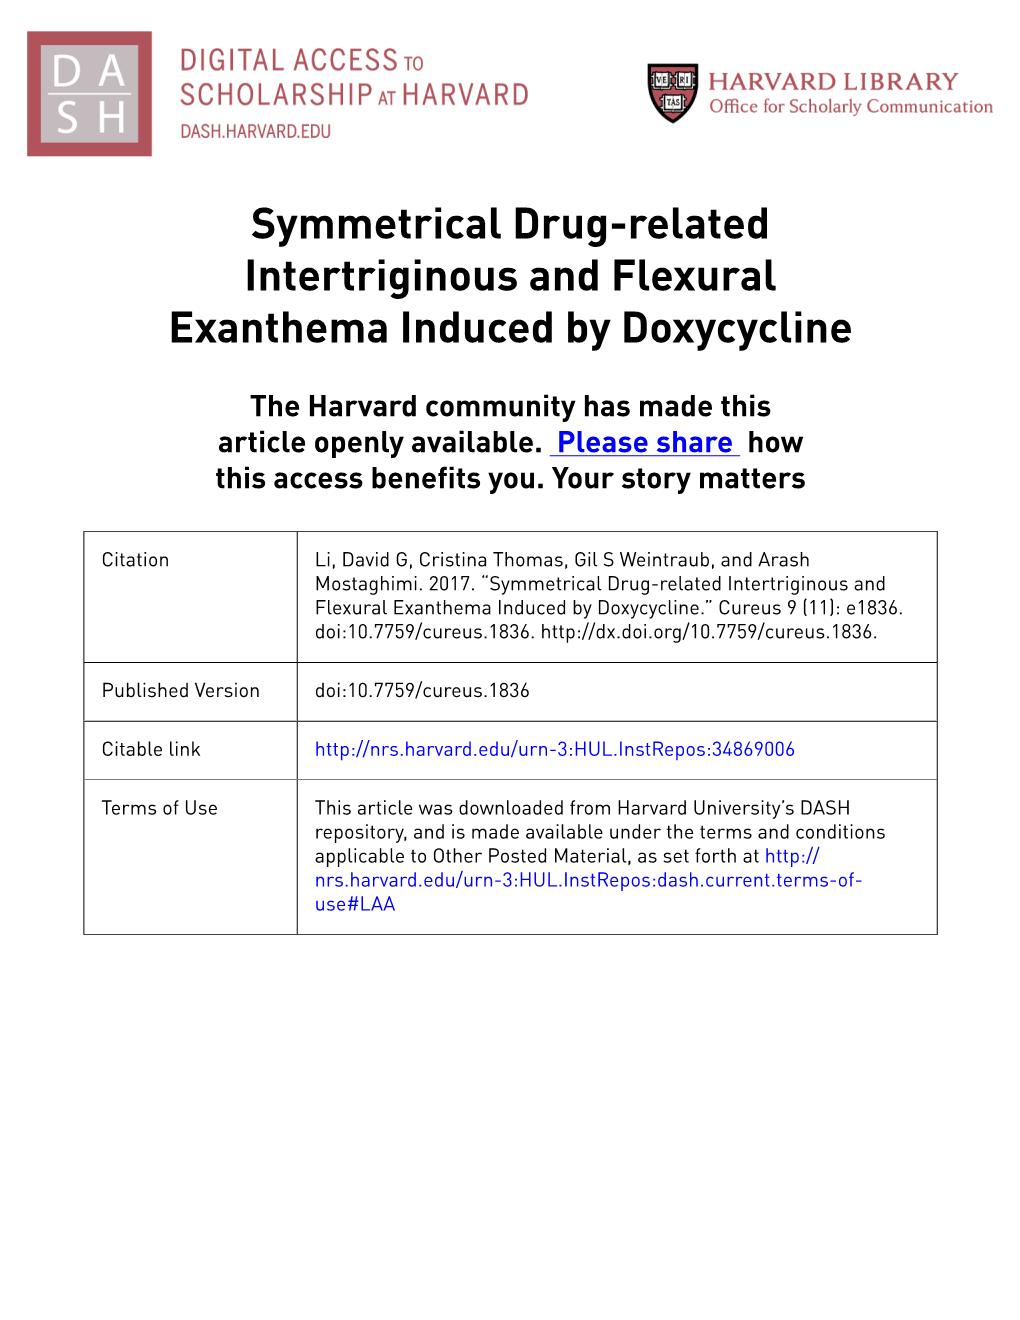 Symmetrical Drug-Related Intertriginous and Flexural Exanthema Induced by Doxycycline